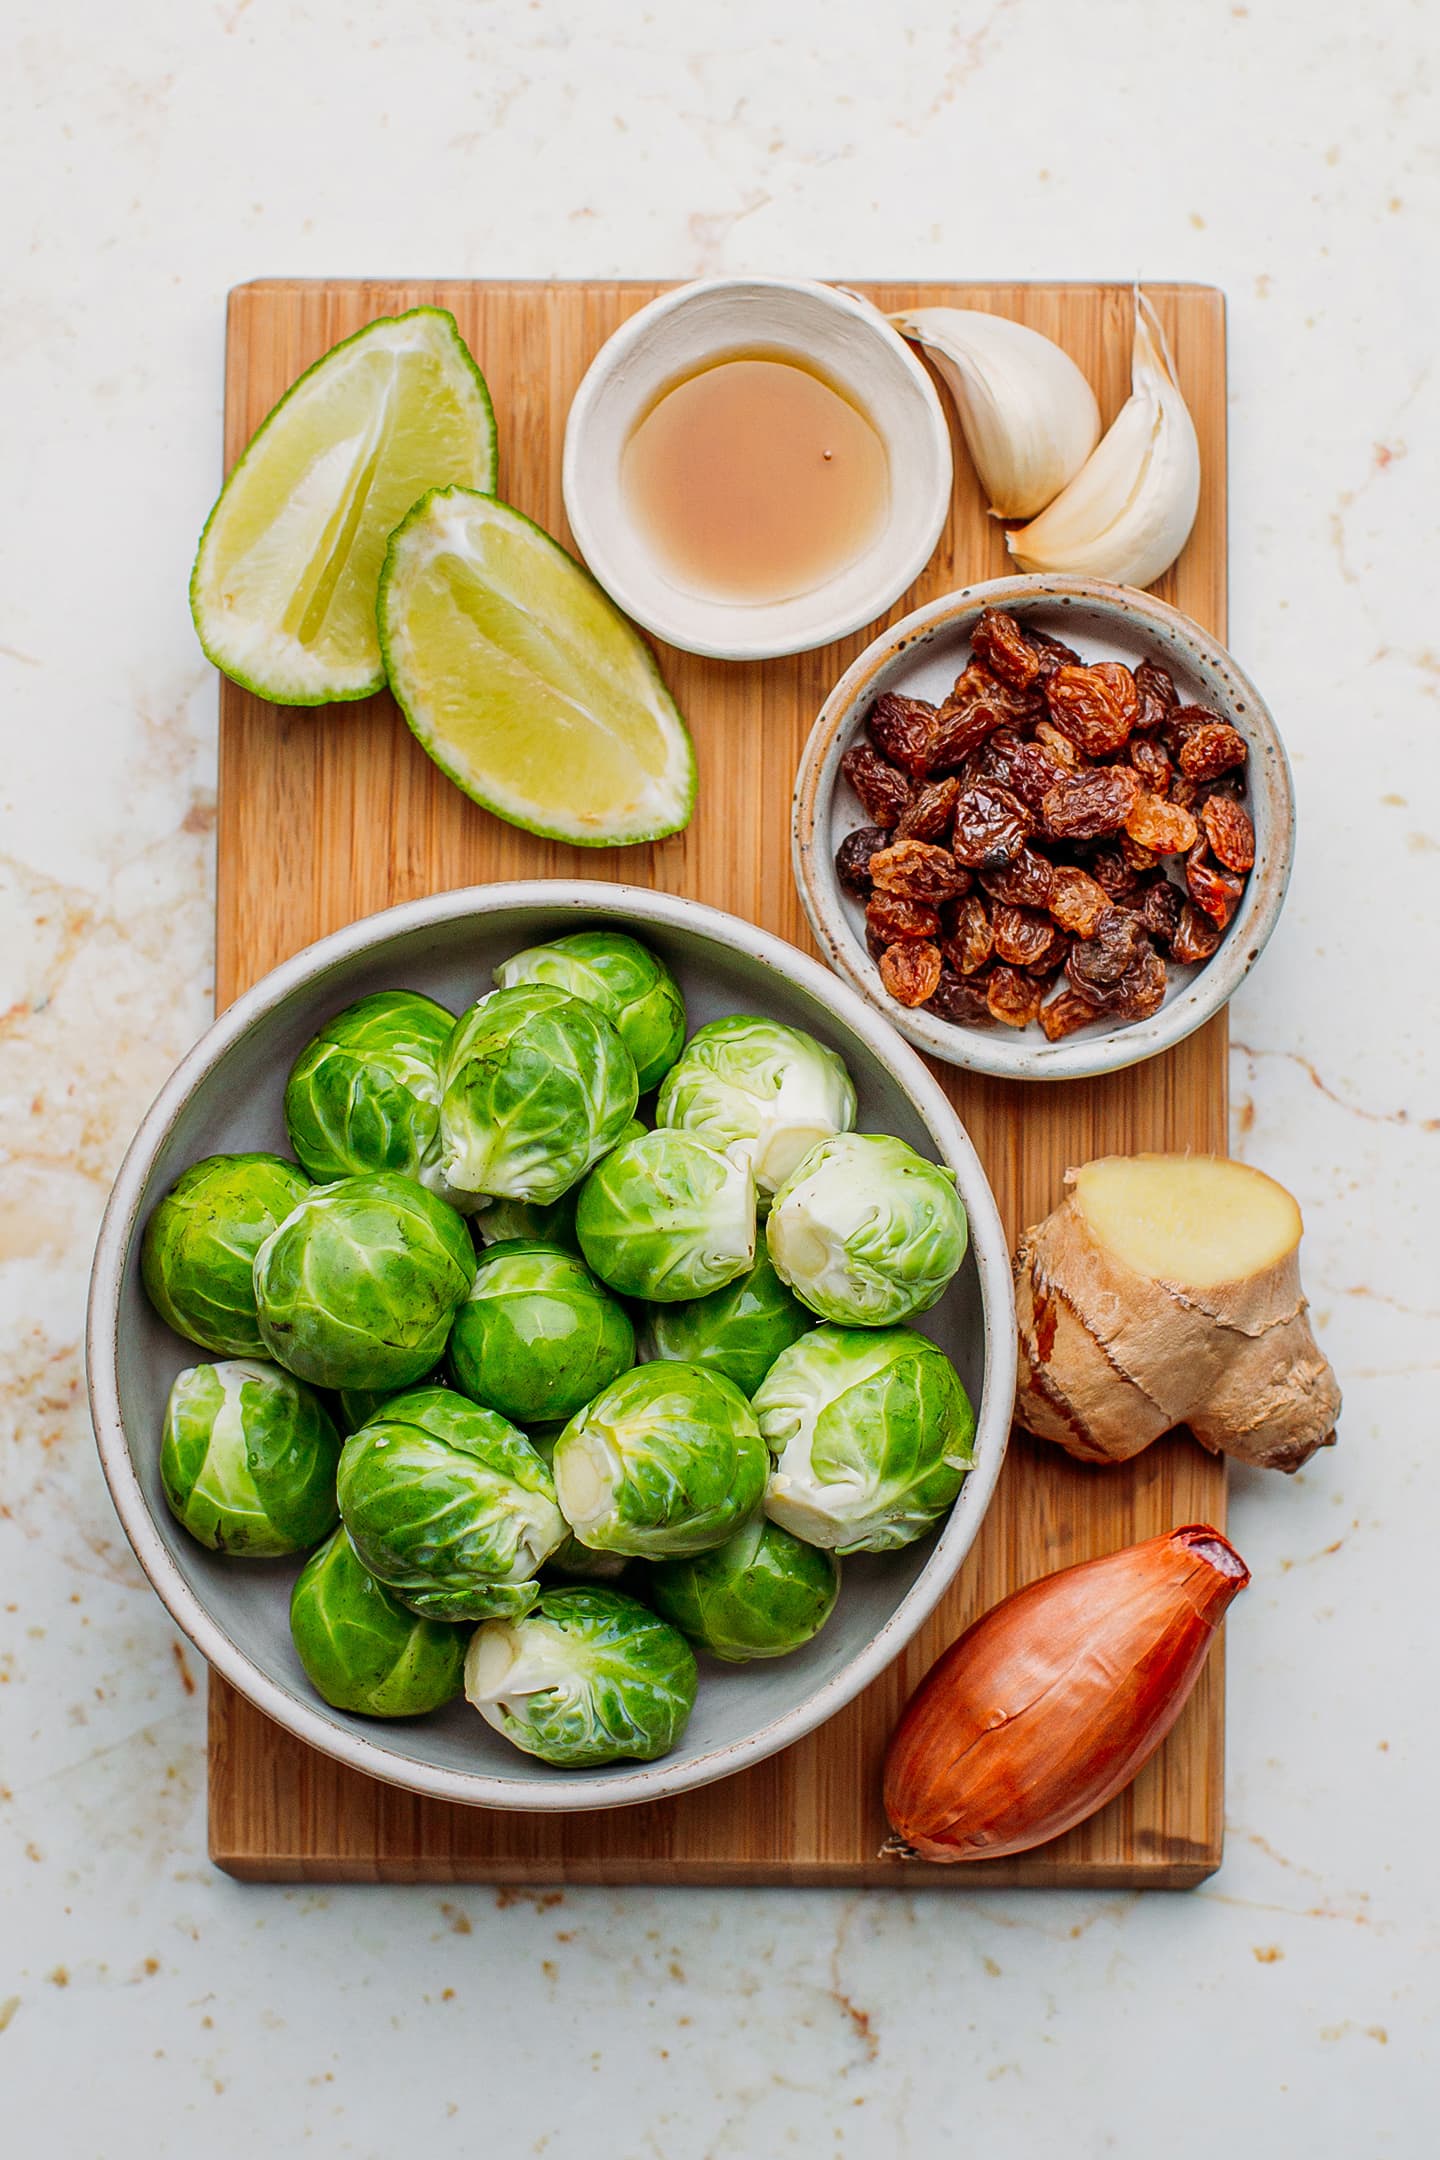 Ingredients like Brussels sprouts, ginger, shallots, raisins, and garlic.